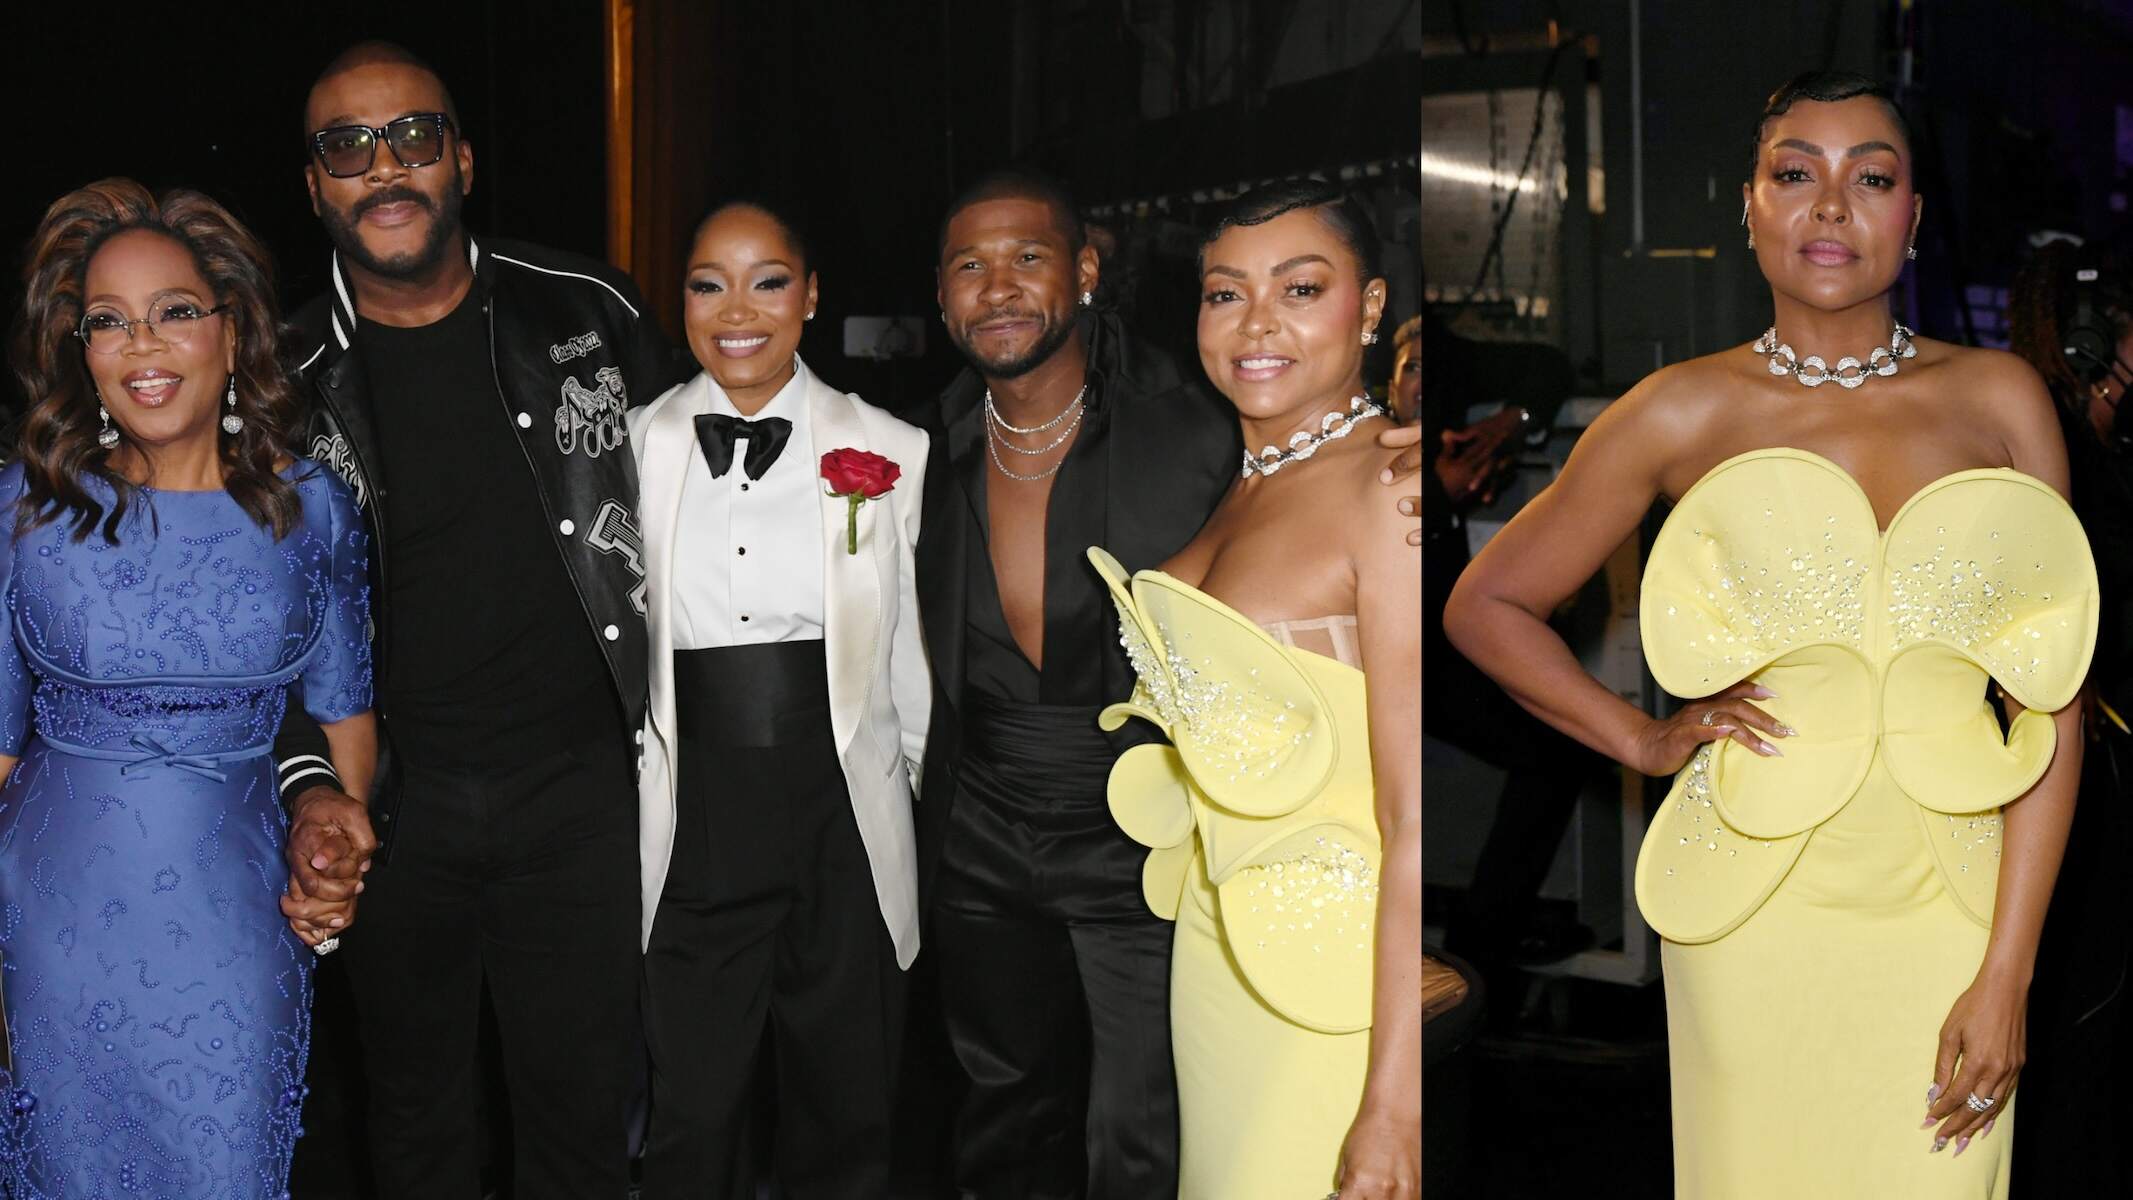 Celebrities Oprah Winfrey, Tyler Perry, Keke Palmer, Usher, and Taraji P. Henson pose together behind the scenes at the 55th NAACP Image Awards